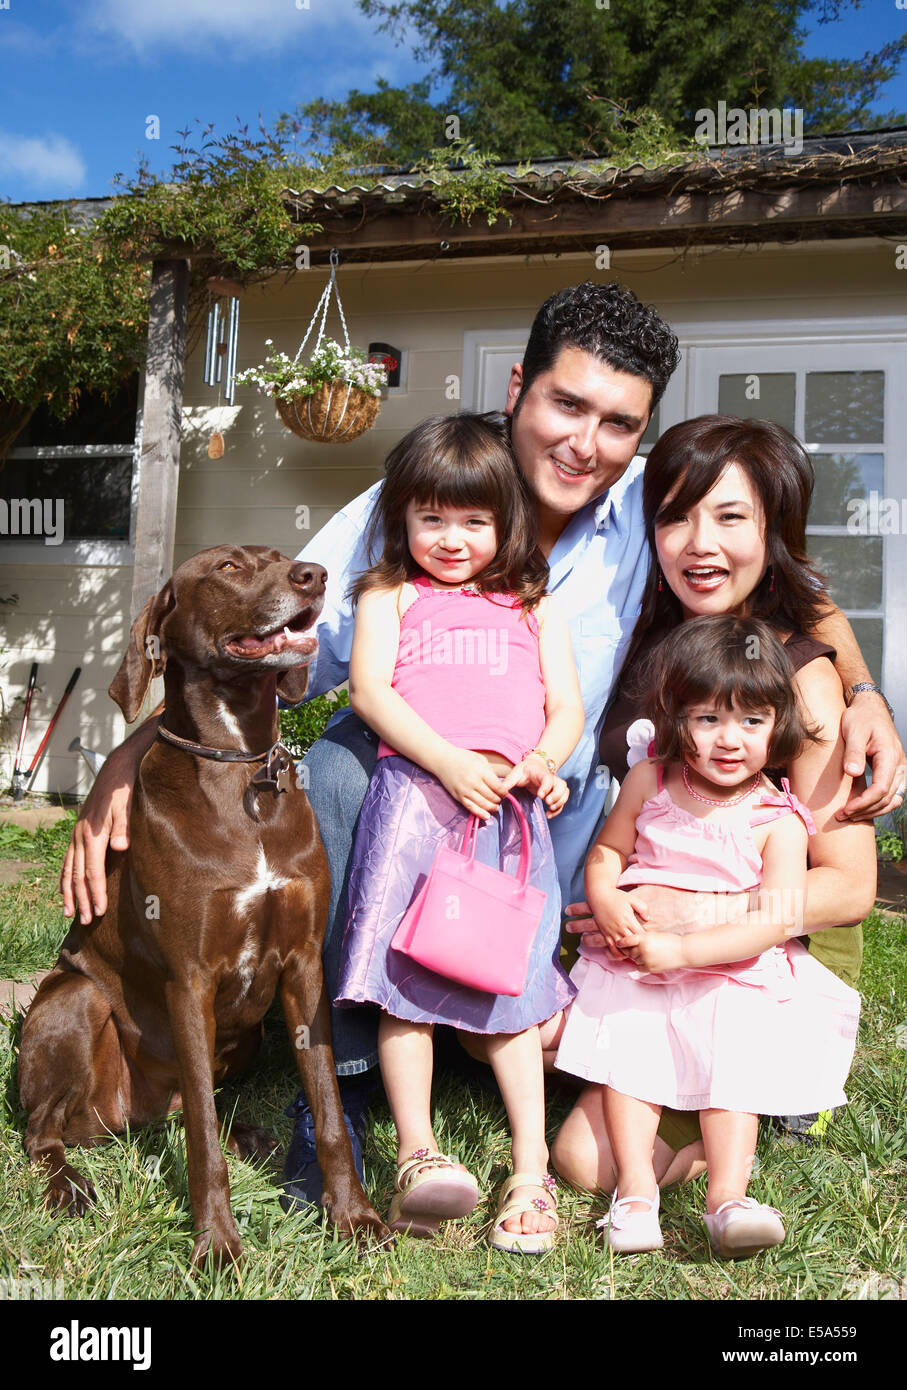 Family smiling together with dog in backyard Stock Photo